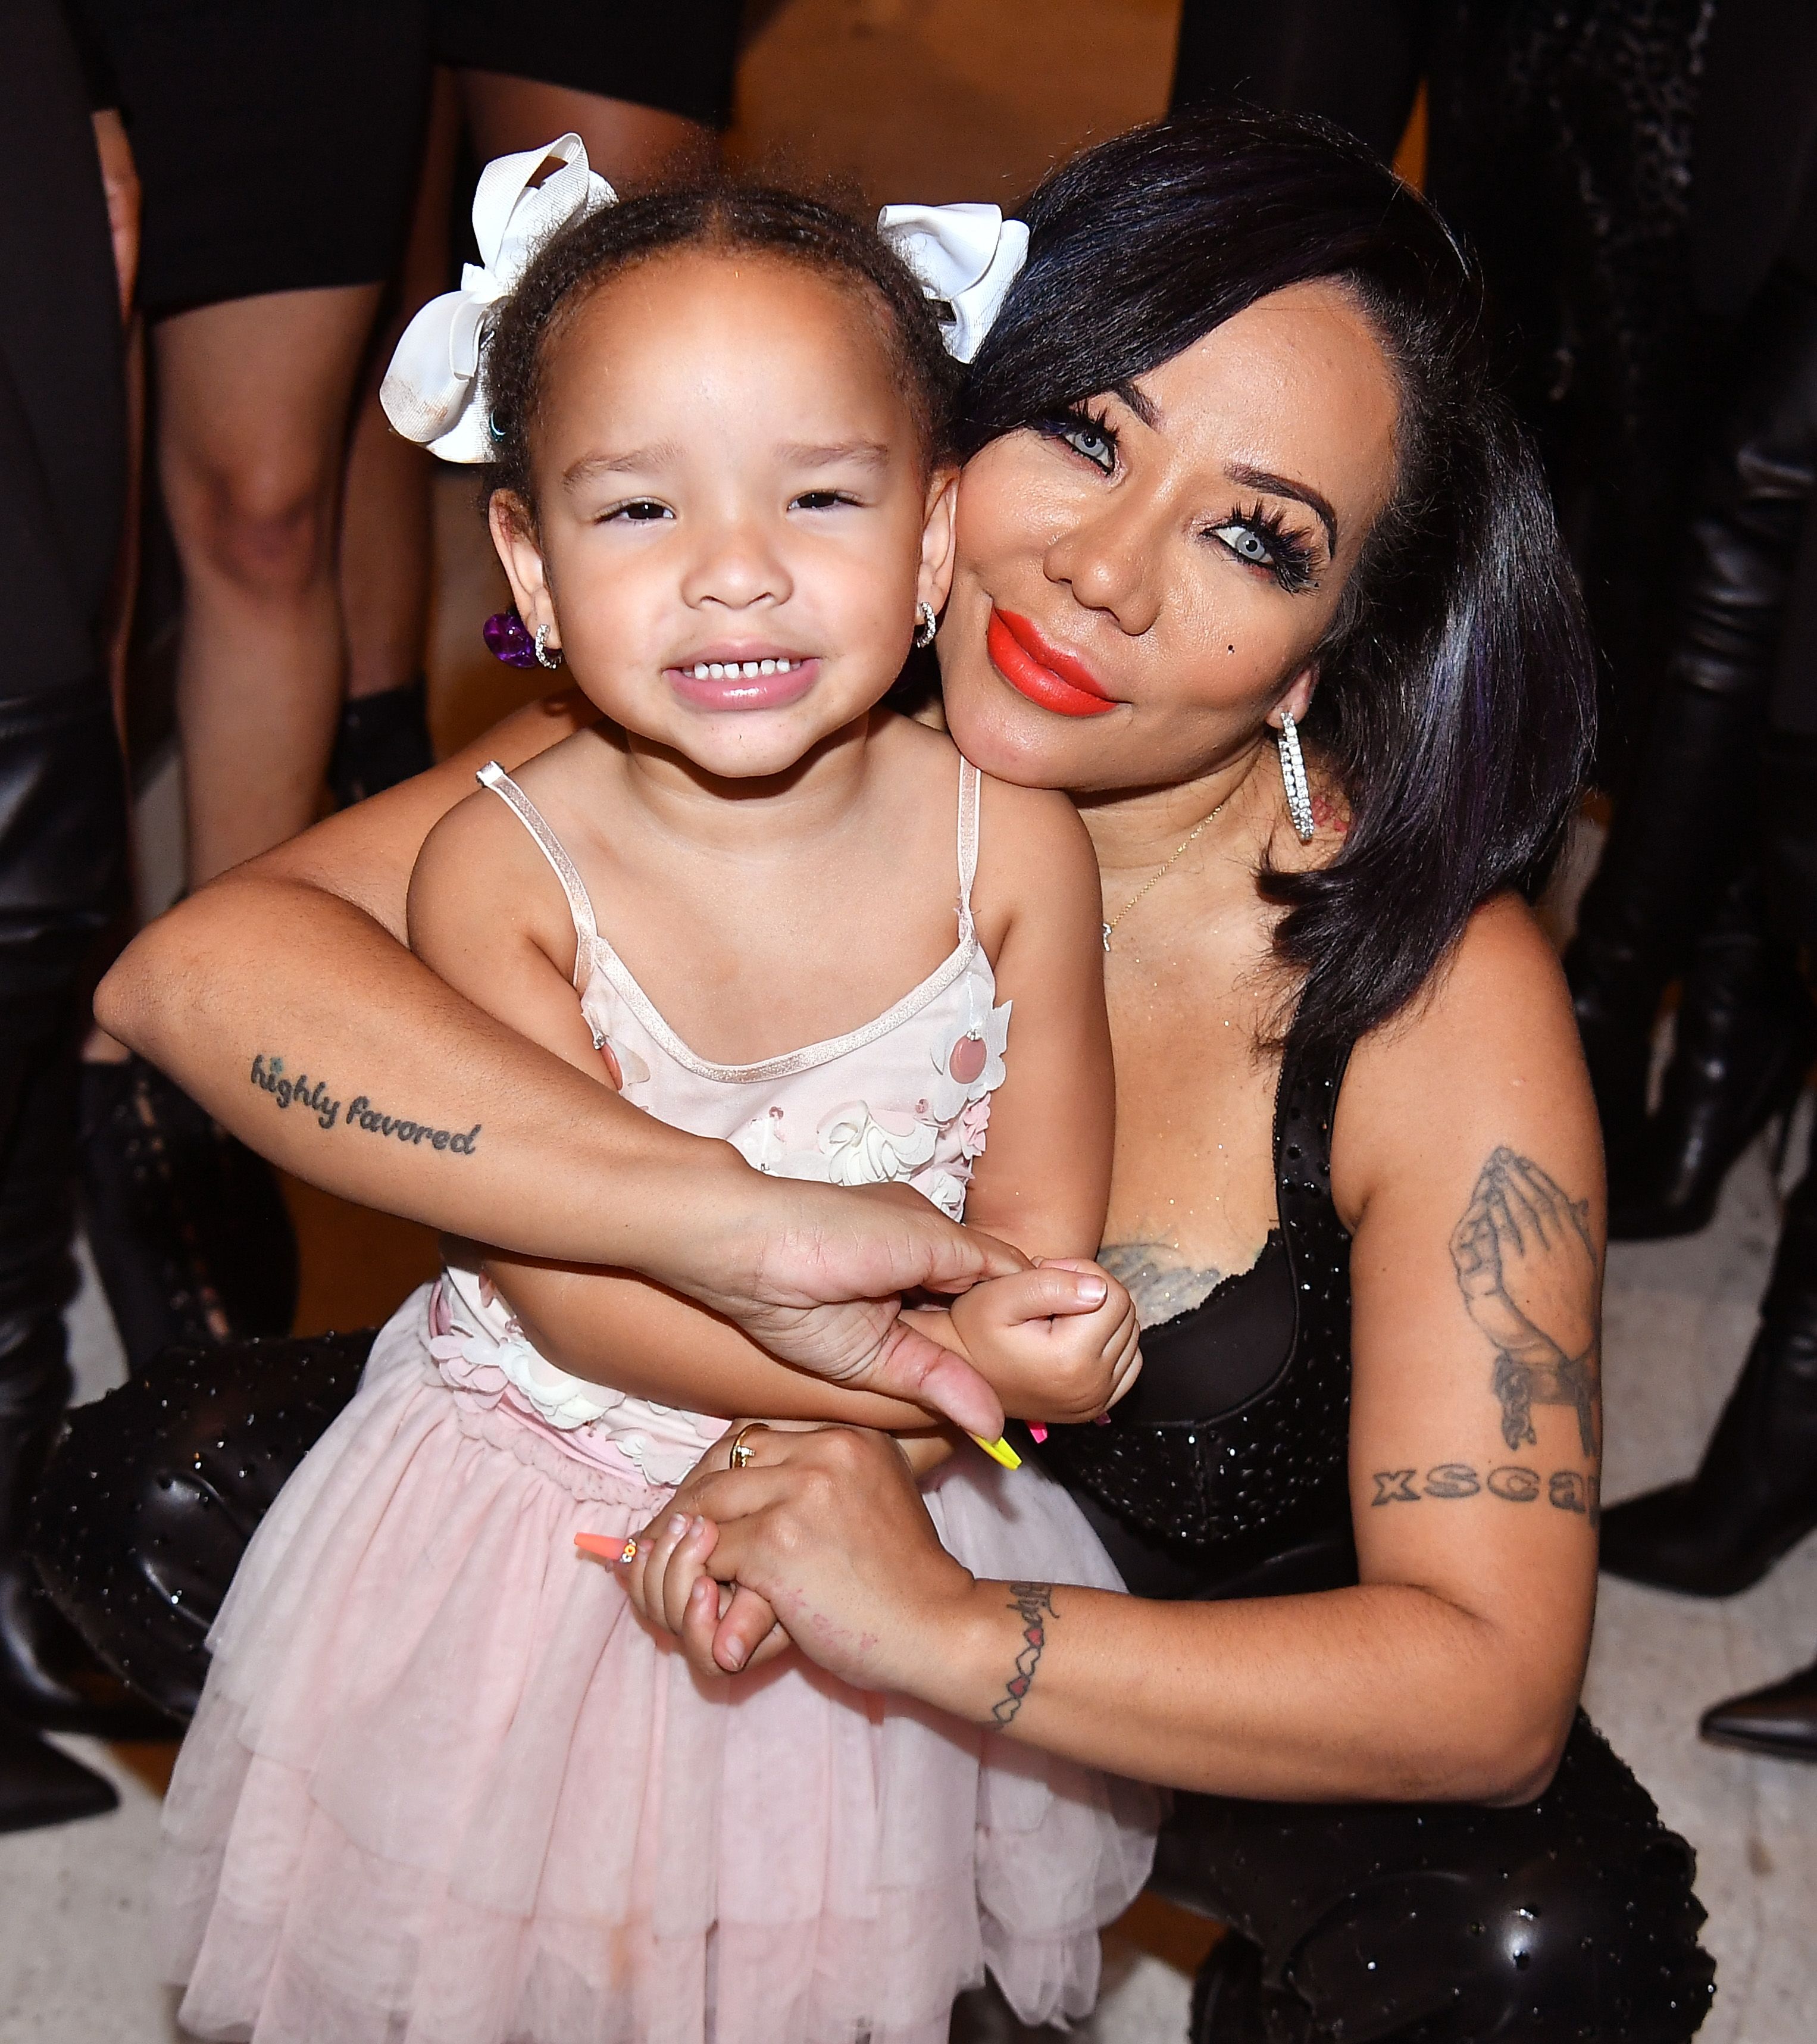 Tameka "Tiny" Harris with her daughter Heiress Diana Harris backstage during "Majic 107.5 After Dark" in 2019 in Atlanta, Georgia | Photo: Getty Images